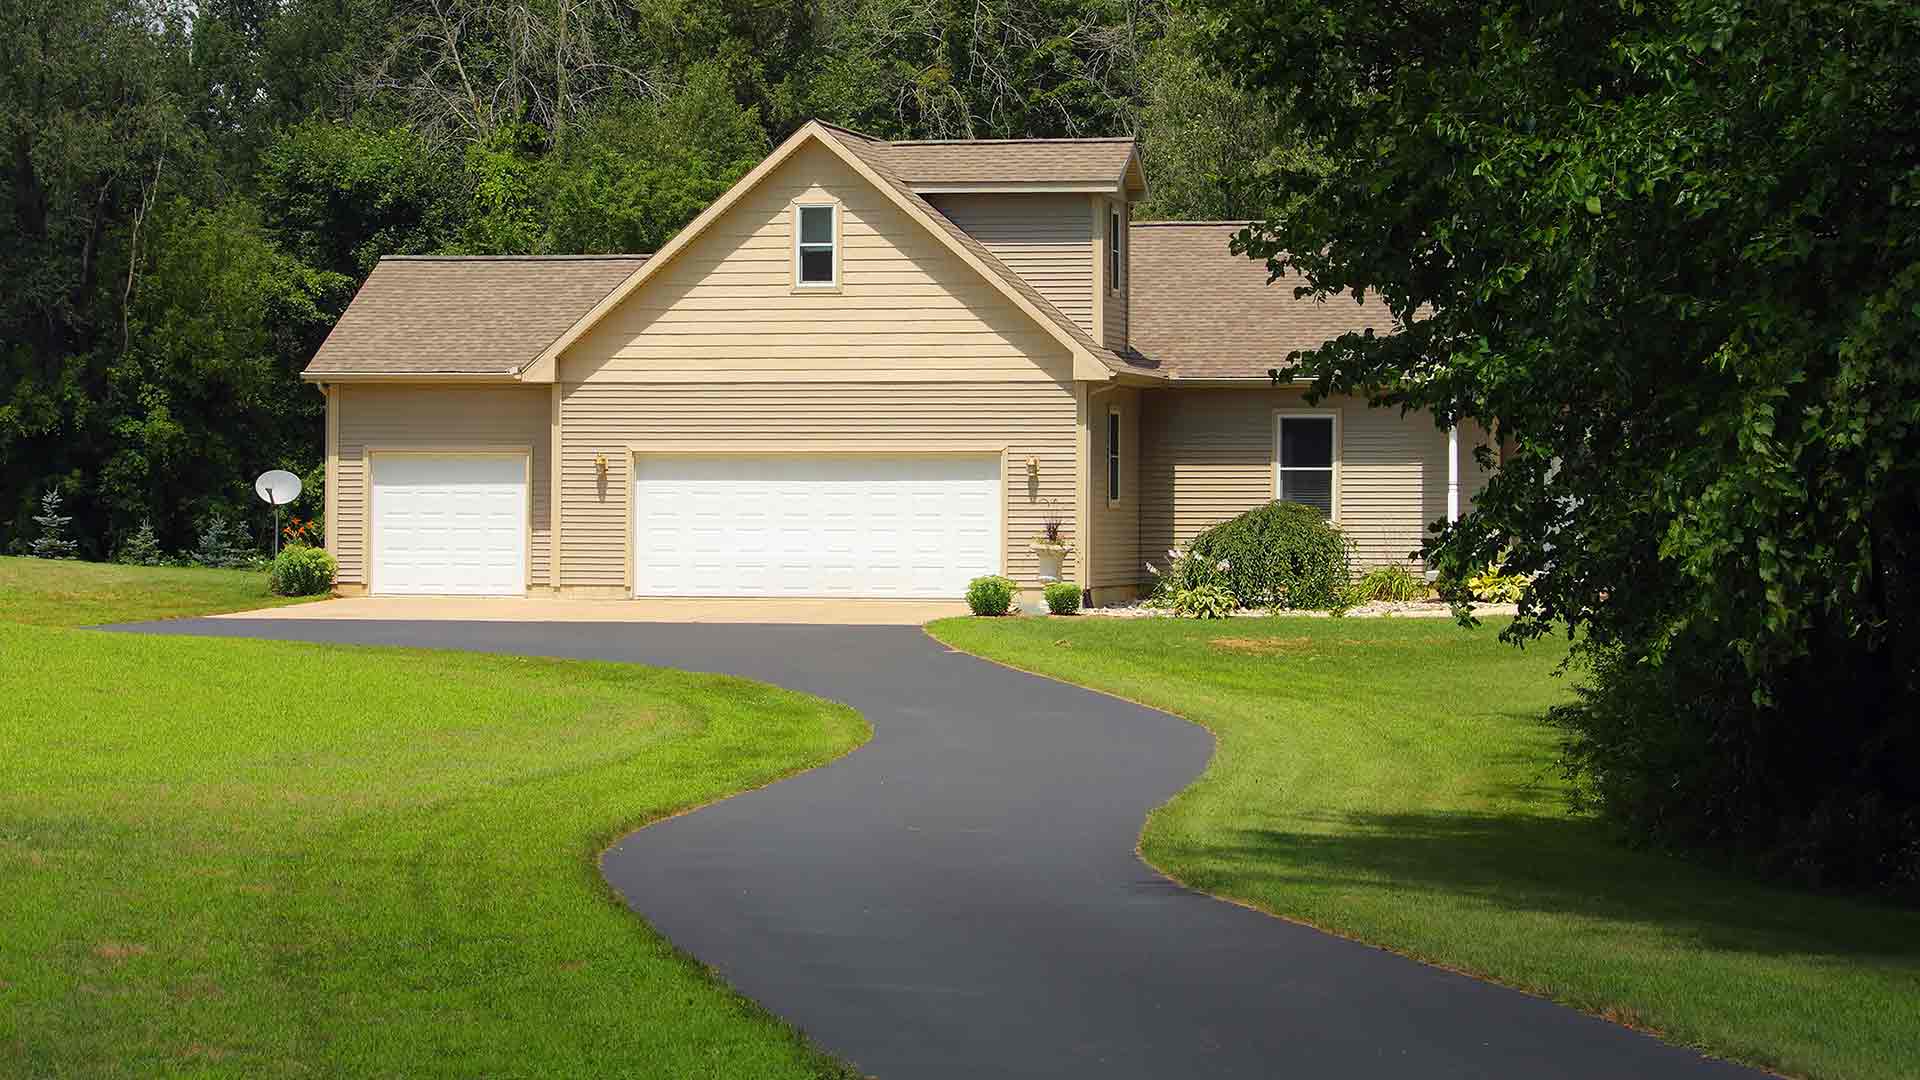 Freshly paved asphalt driveway by J&J Paving at residential home in Anne Arundel County, MD.